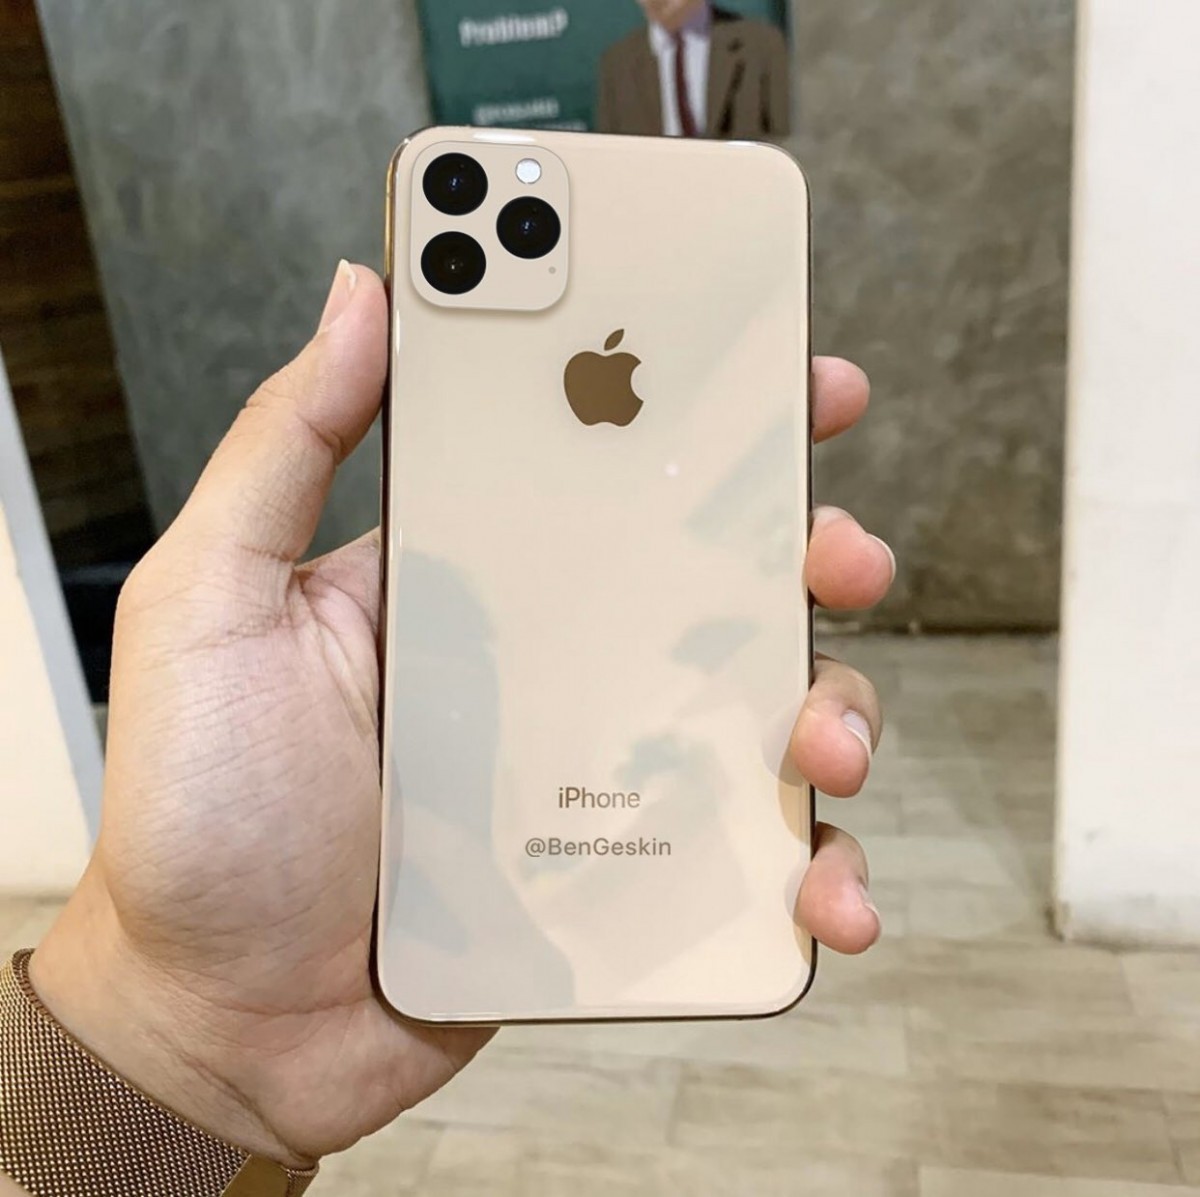 The iPhone 11 (XI) is shown in gold color